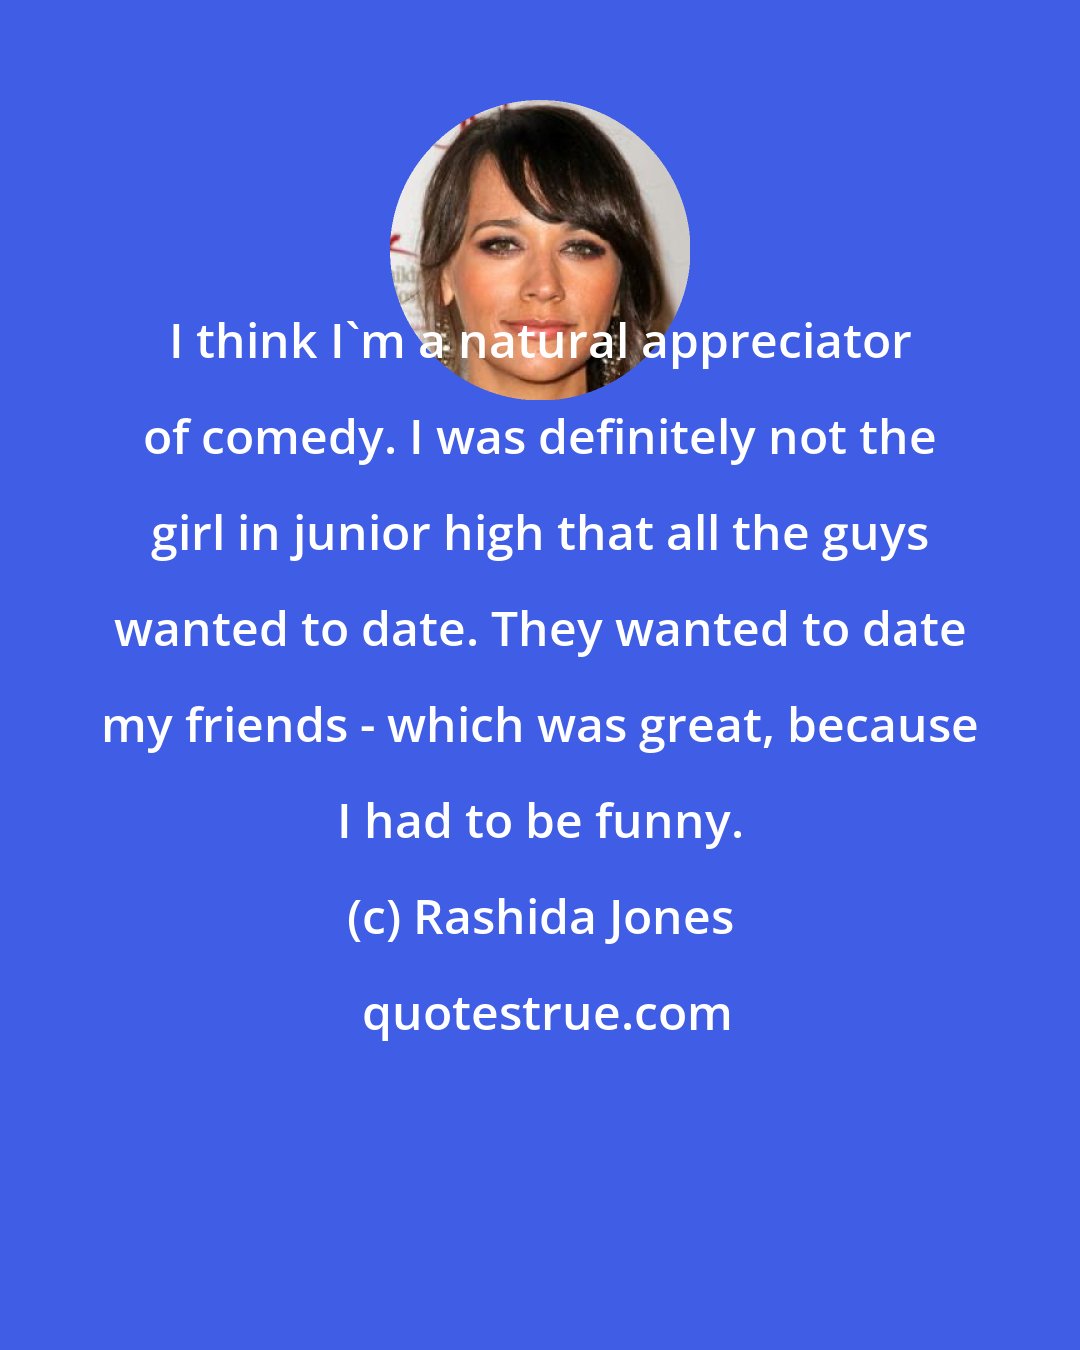 Rashida Jones: I think I'm a natural appreciator of comedy. I was definitely not the girl in junior high that all the guys wanted to date. They wanted to date my friends - which was great, because I had to be funny.